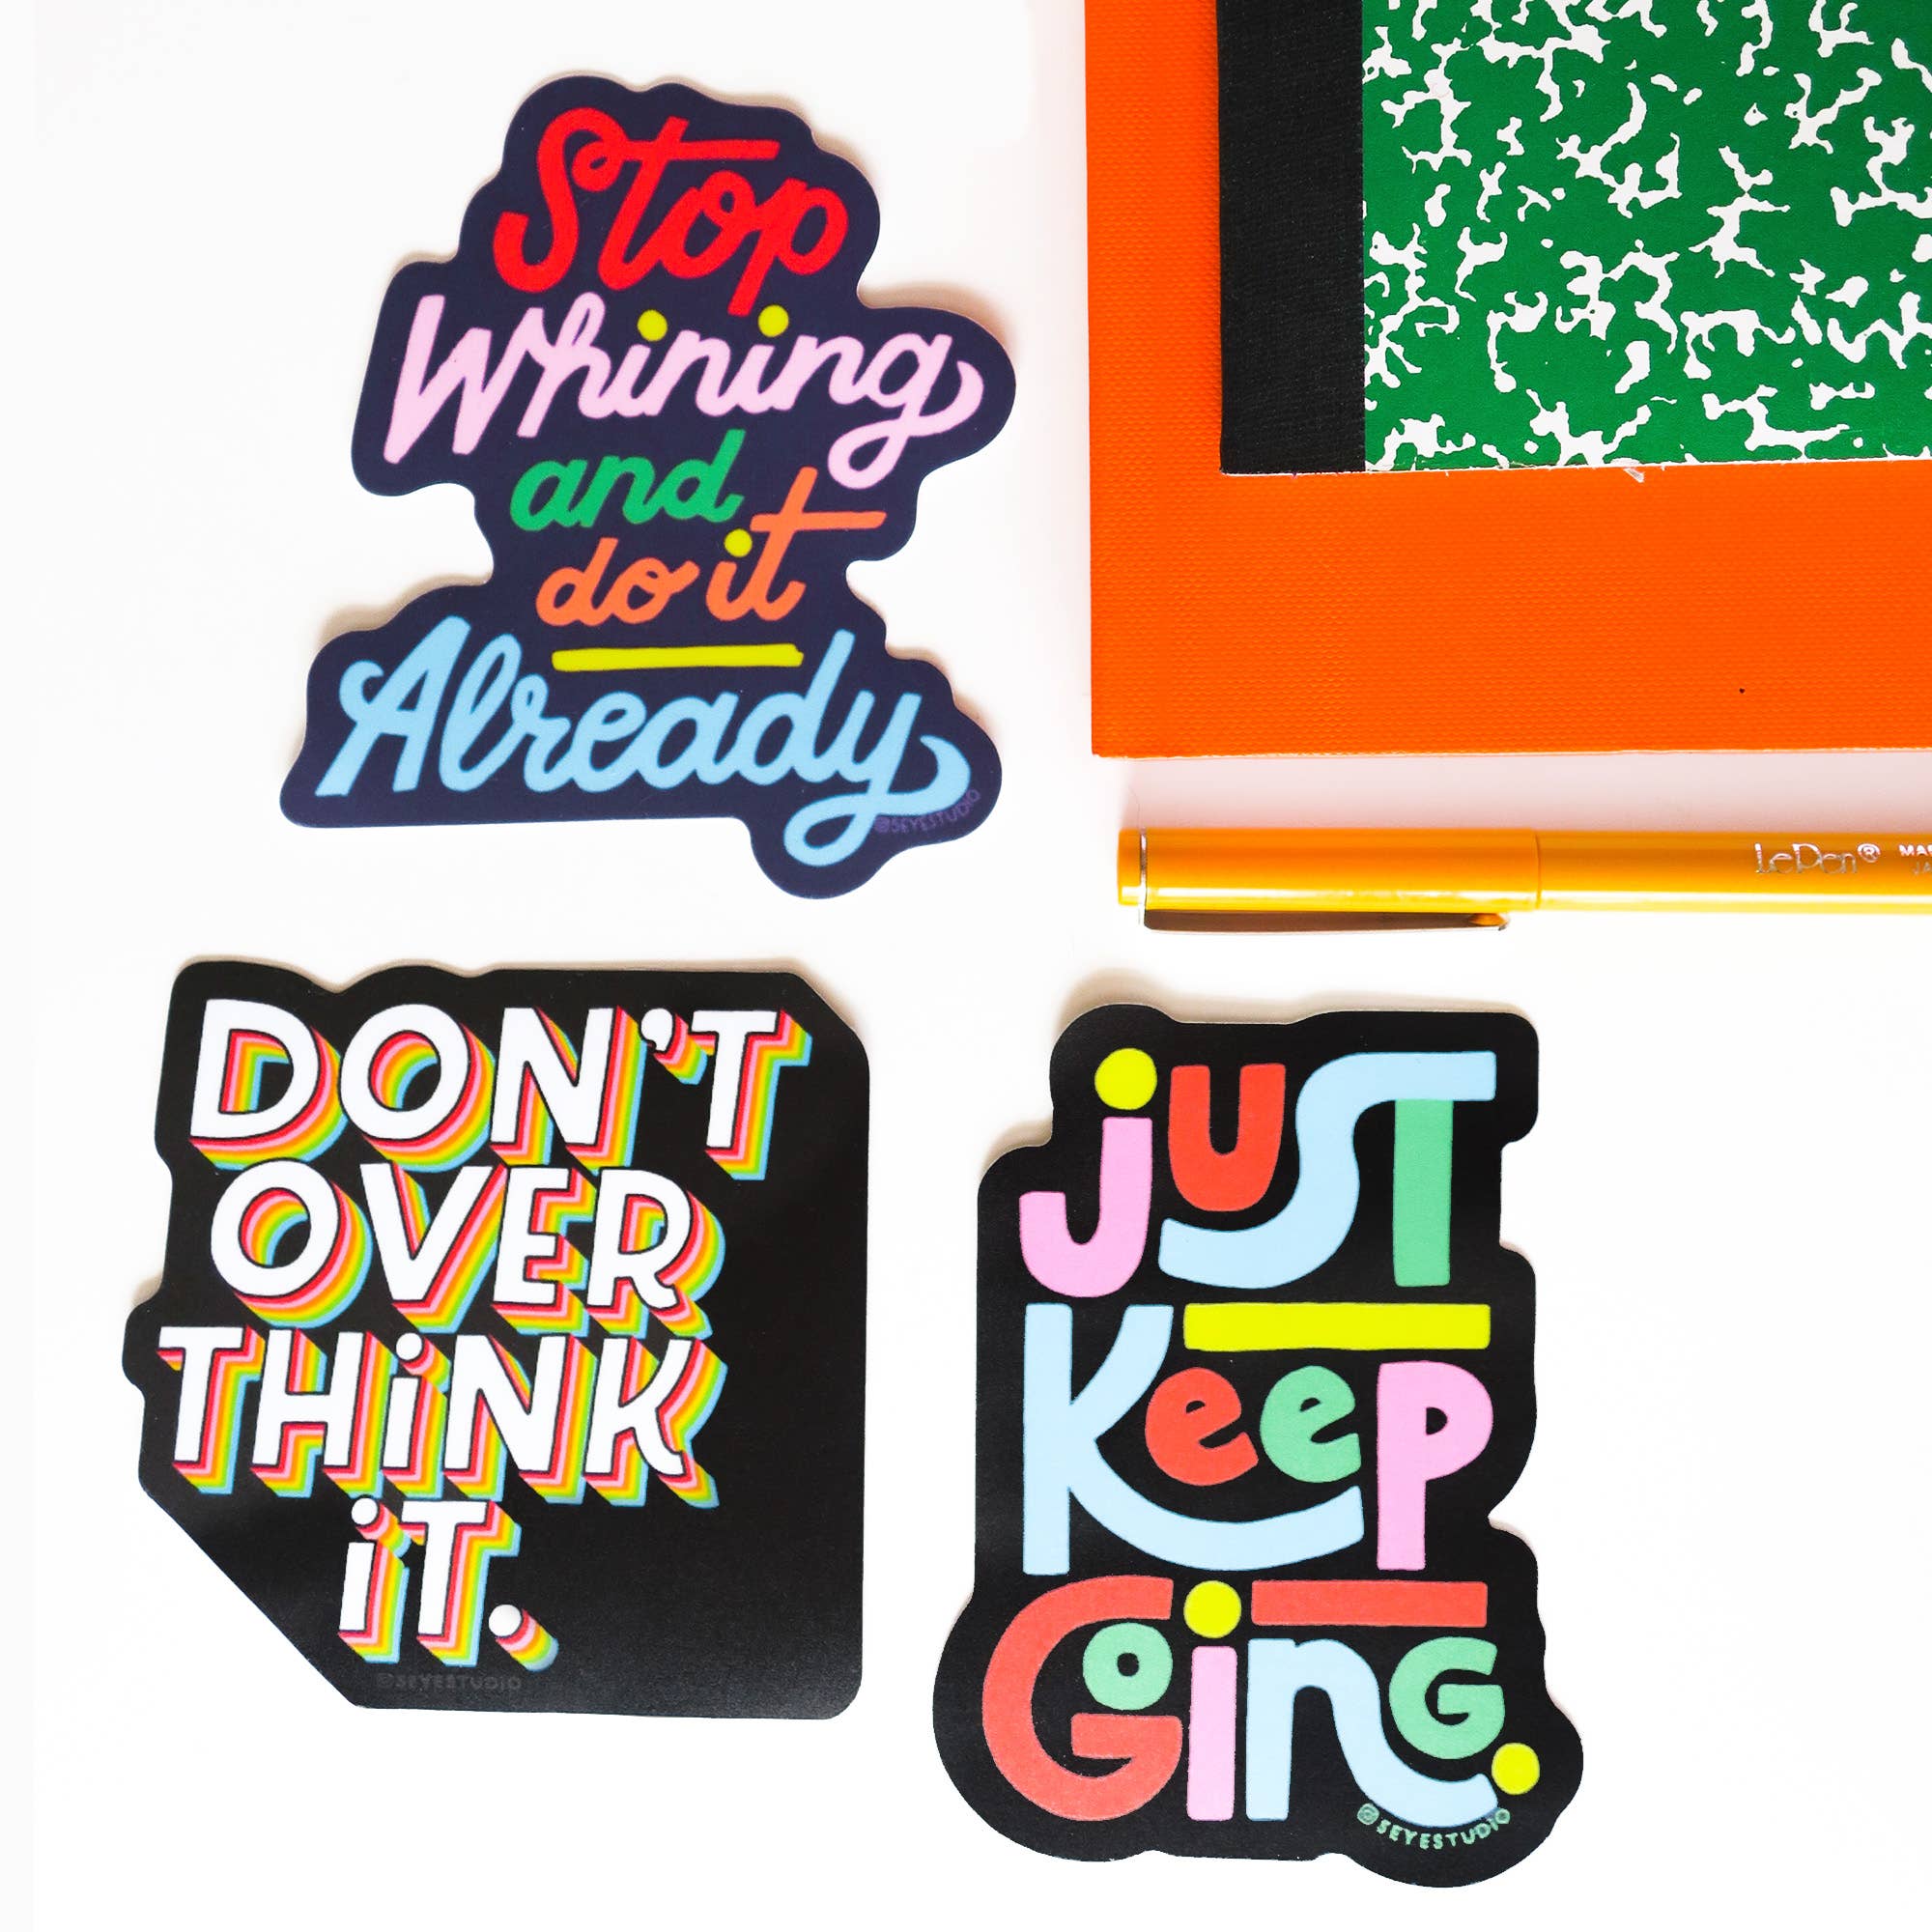 Just Keep Going Multicolor Letters Vinyl Sticker